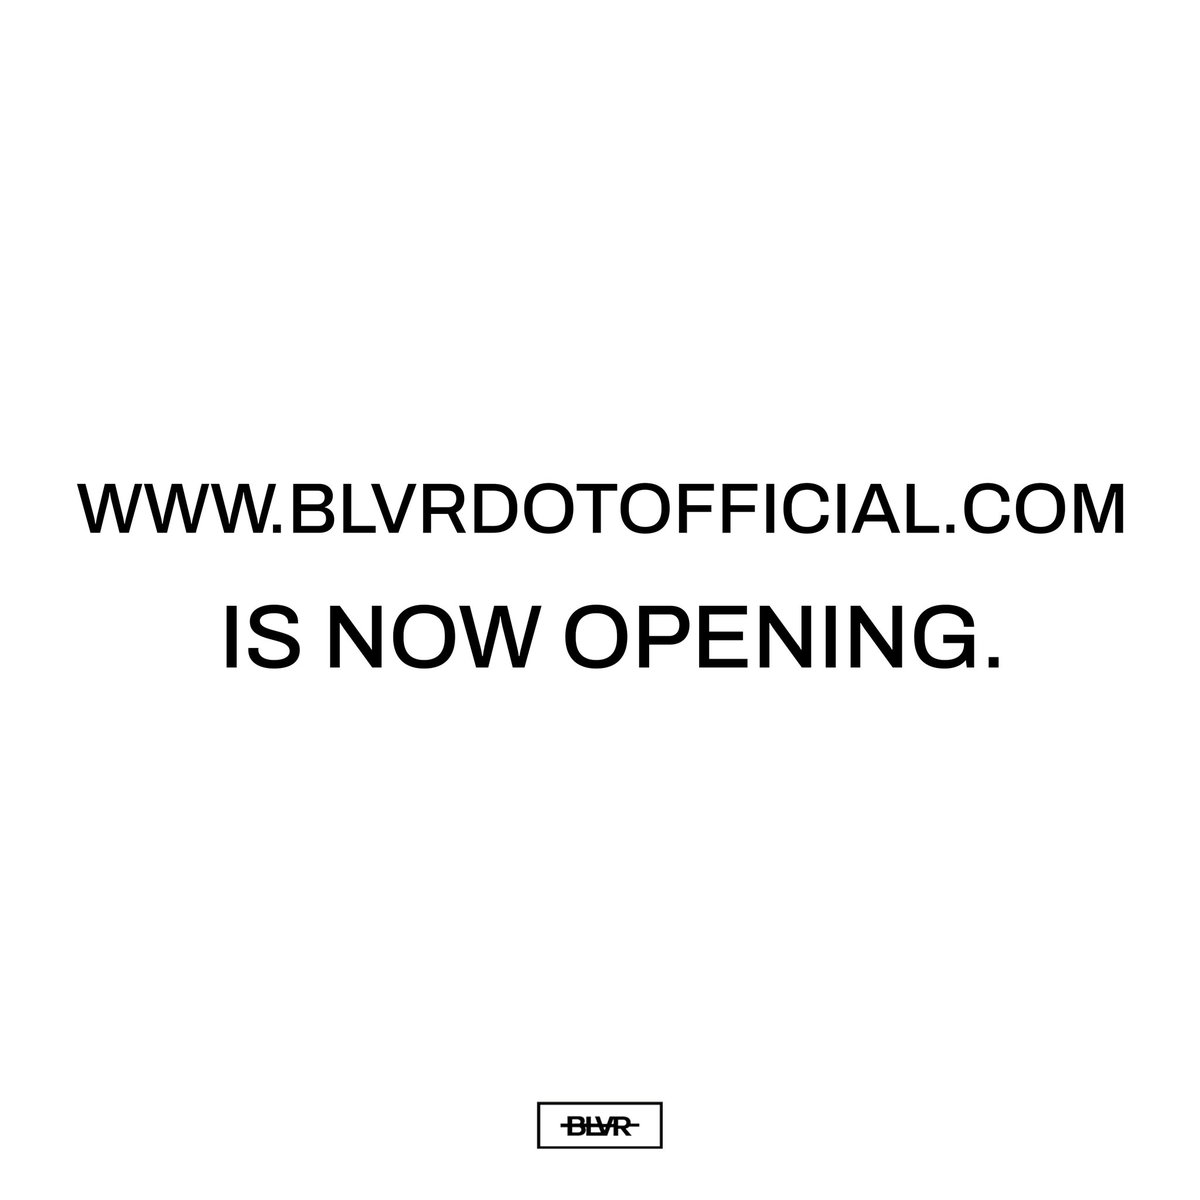 blvrdotofficial.com ' IS NOW OPENING '

#BLVRER